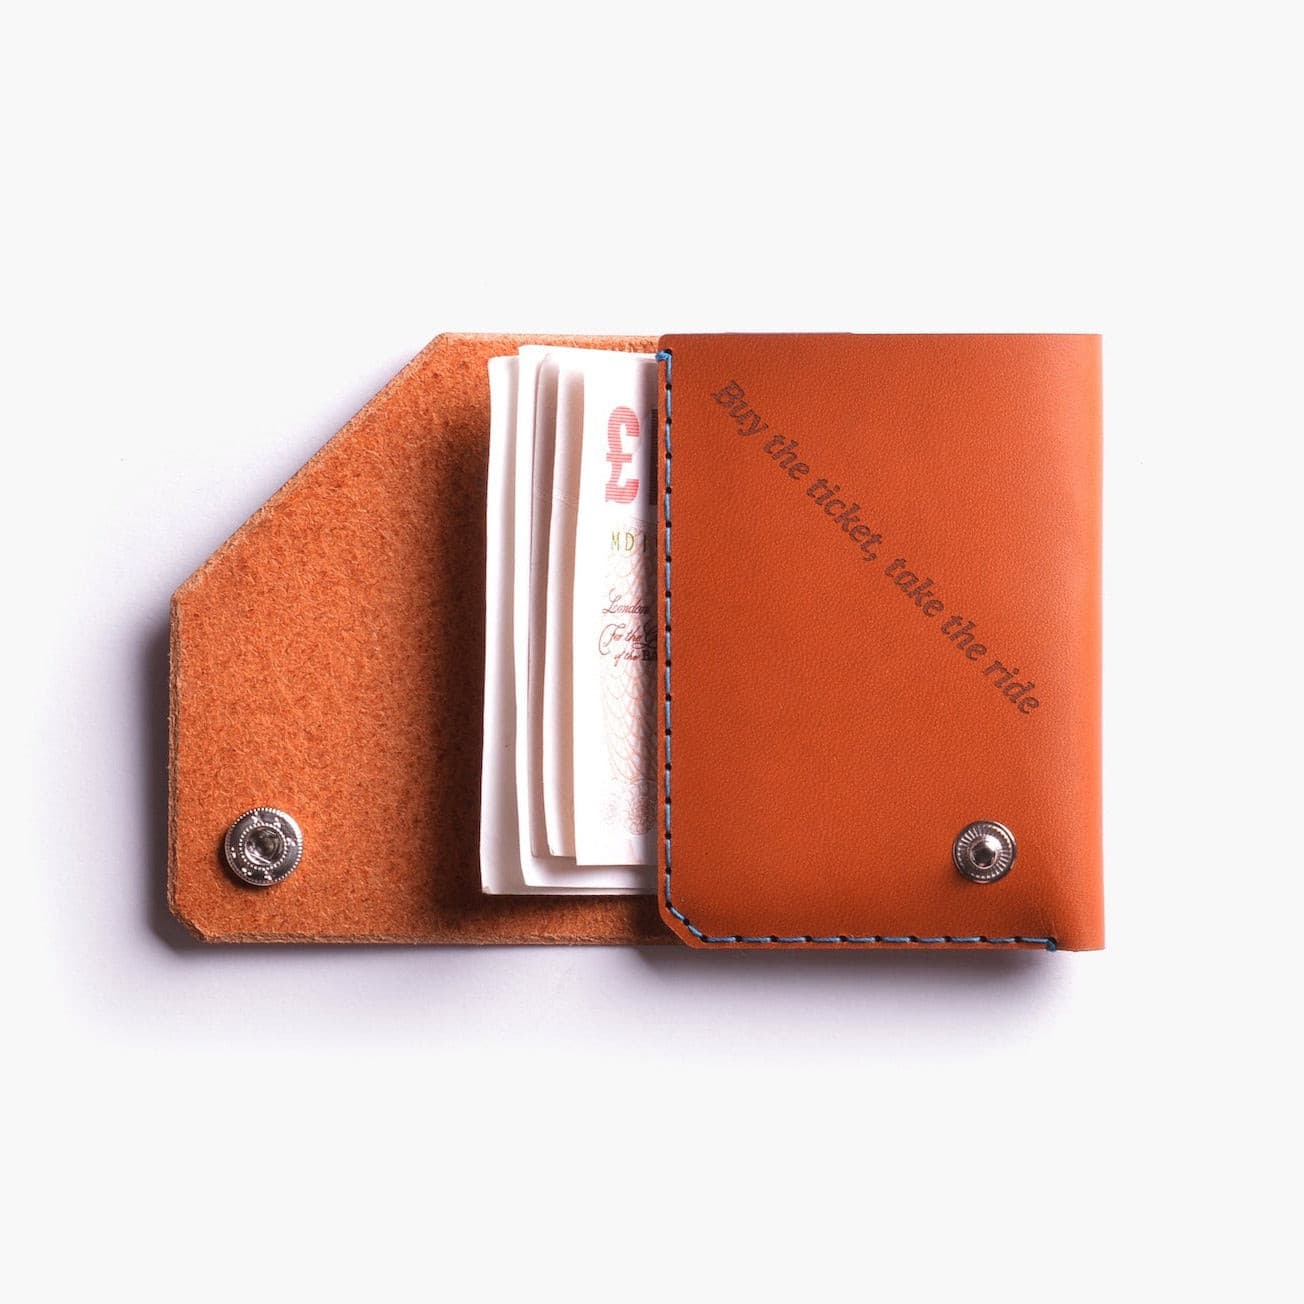 Cash Wallet - Whisky made in England by Wingback.